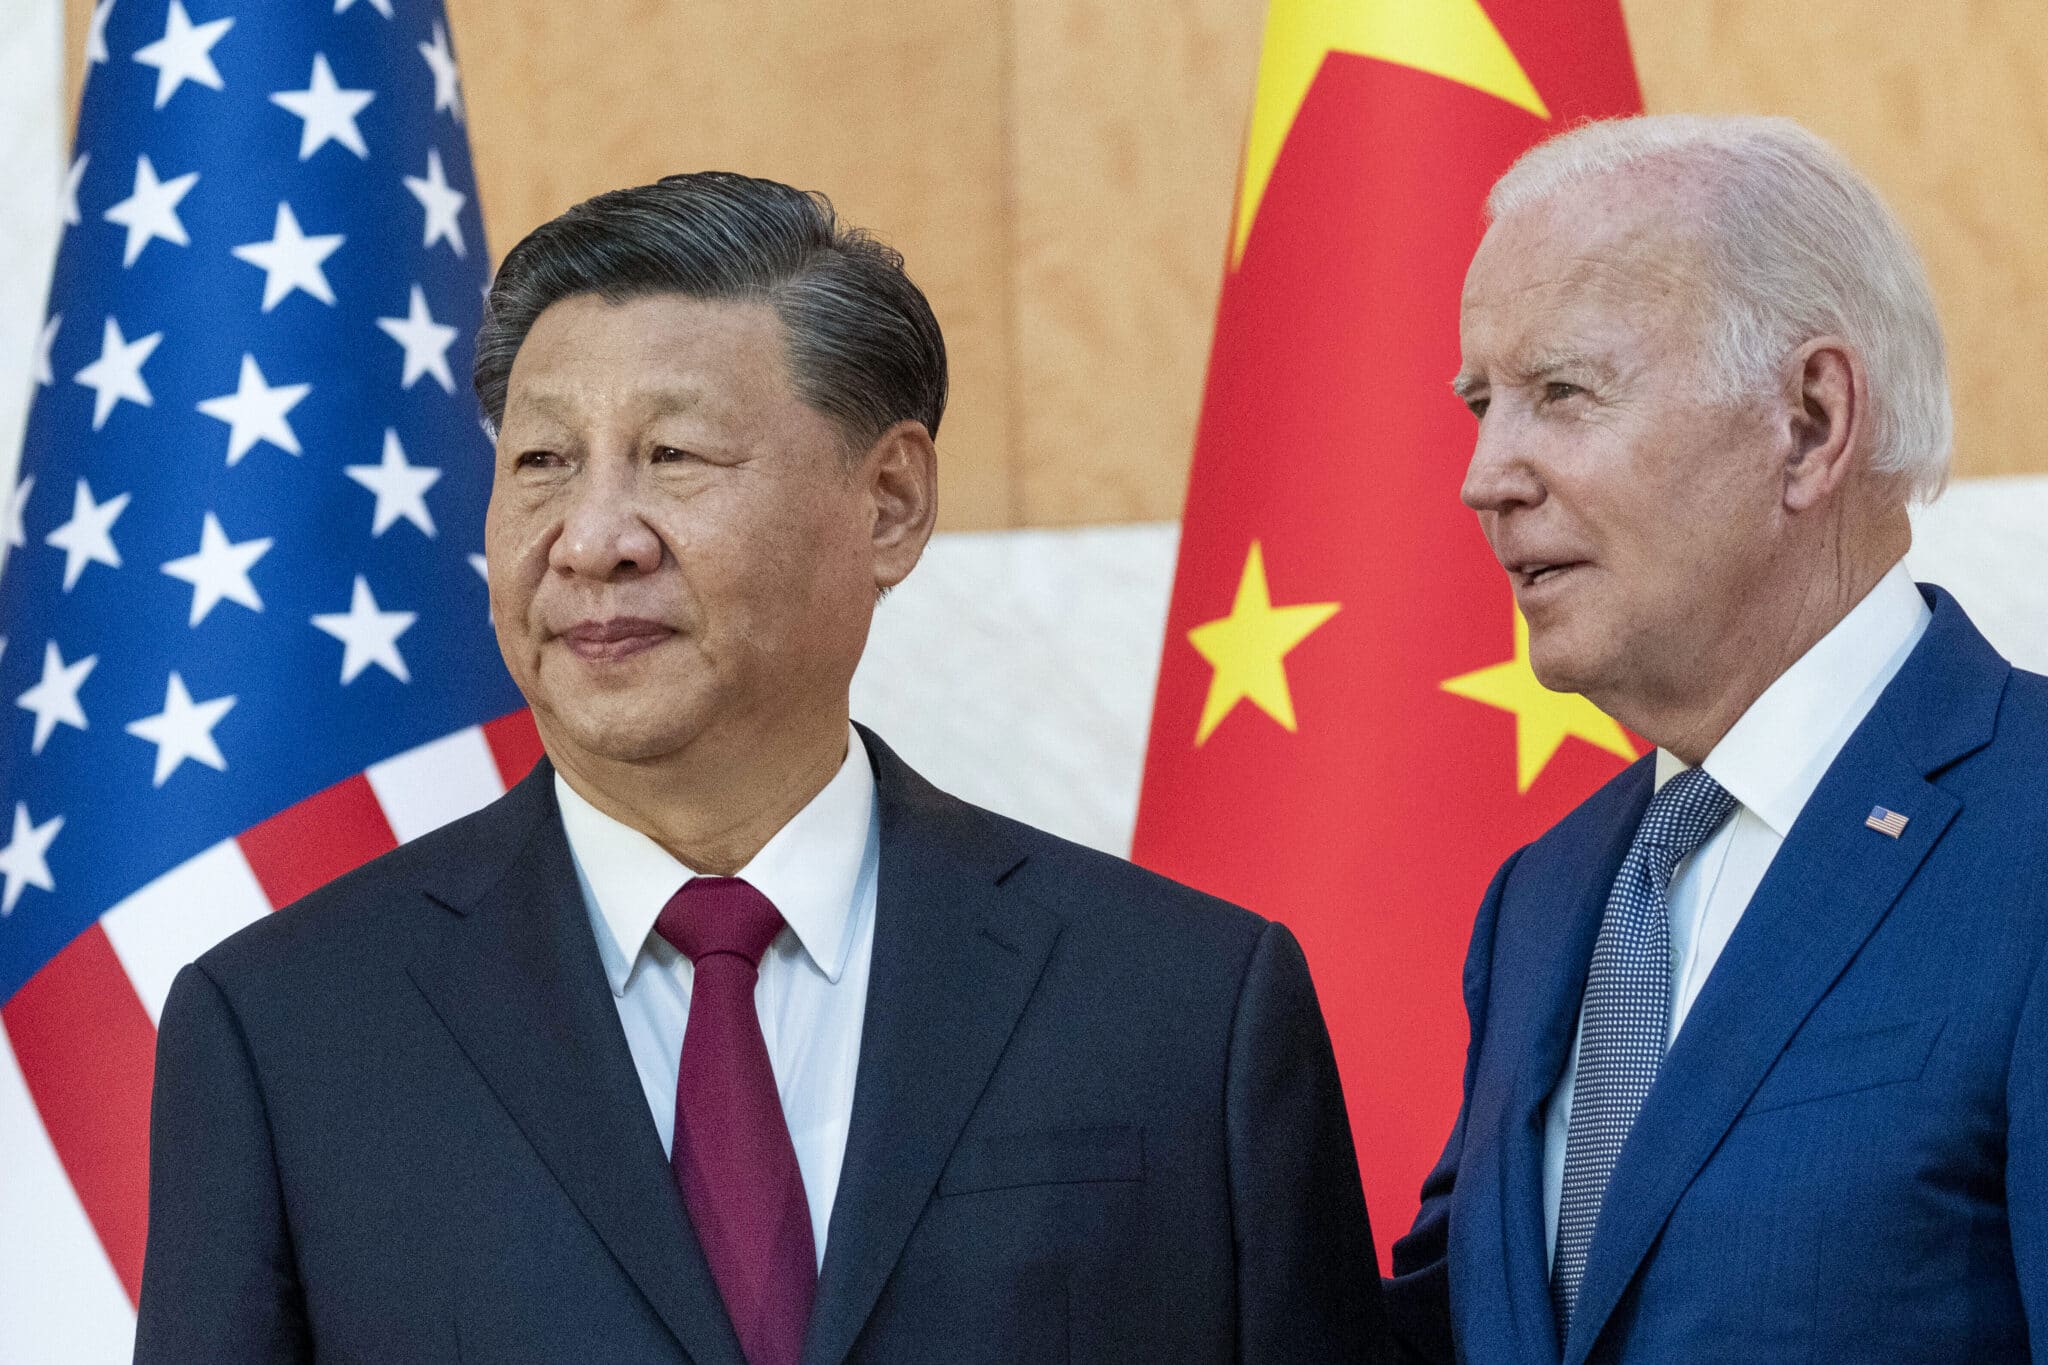 U.S. President Joe Biden, right, stands with Chinese President Xi Jinping before a meeting on the sidelines of the G20 summit meeting, Monday, Nov. 14, 2022, in Bali, Indonesia. Biden says Chinese counterpart Xi has agreed to resume crucial talks on climate between the two countries. The Chinese and U.S. leaders met Monday on the sidelines of the Group of 20 summit in Bali. (AP Photo/Alex Brandon)